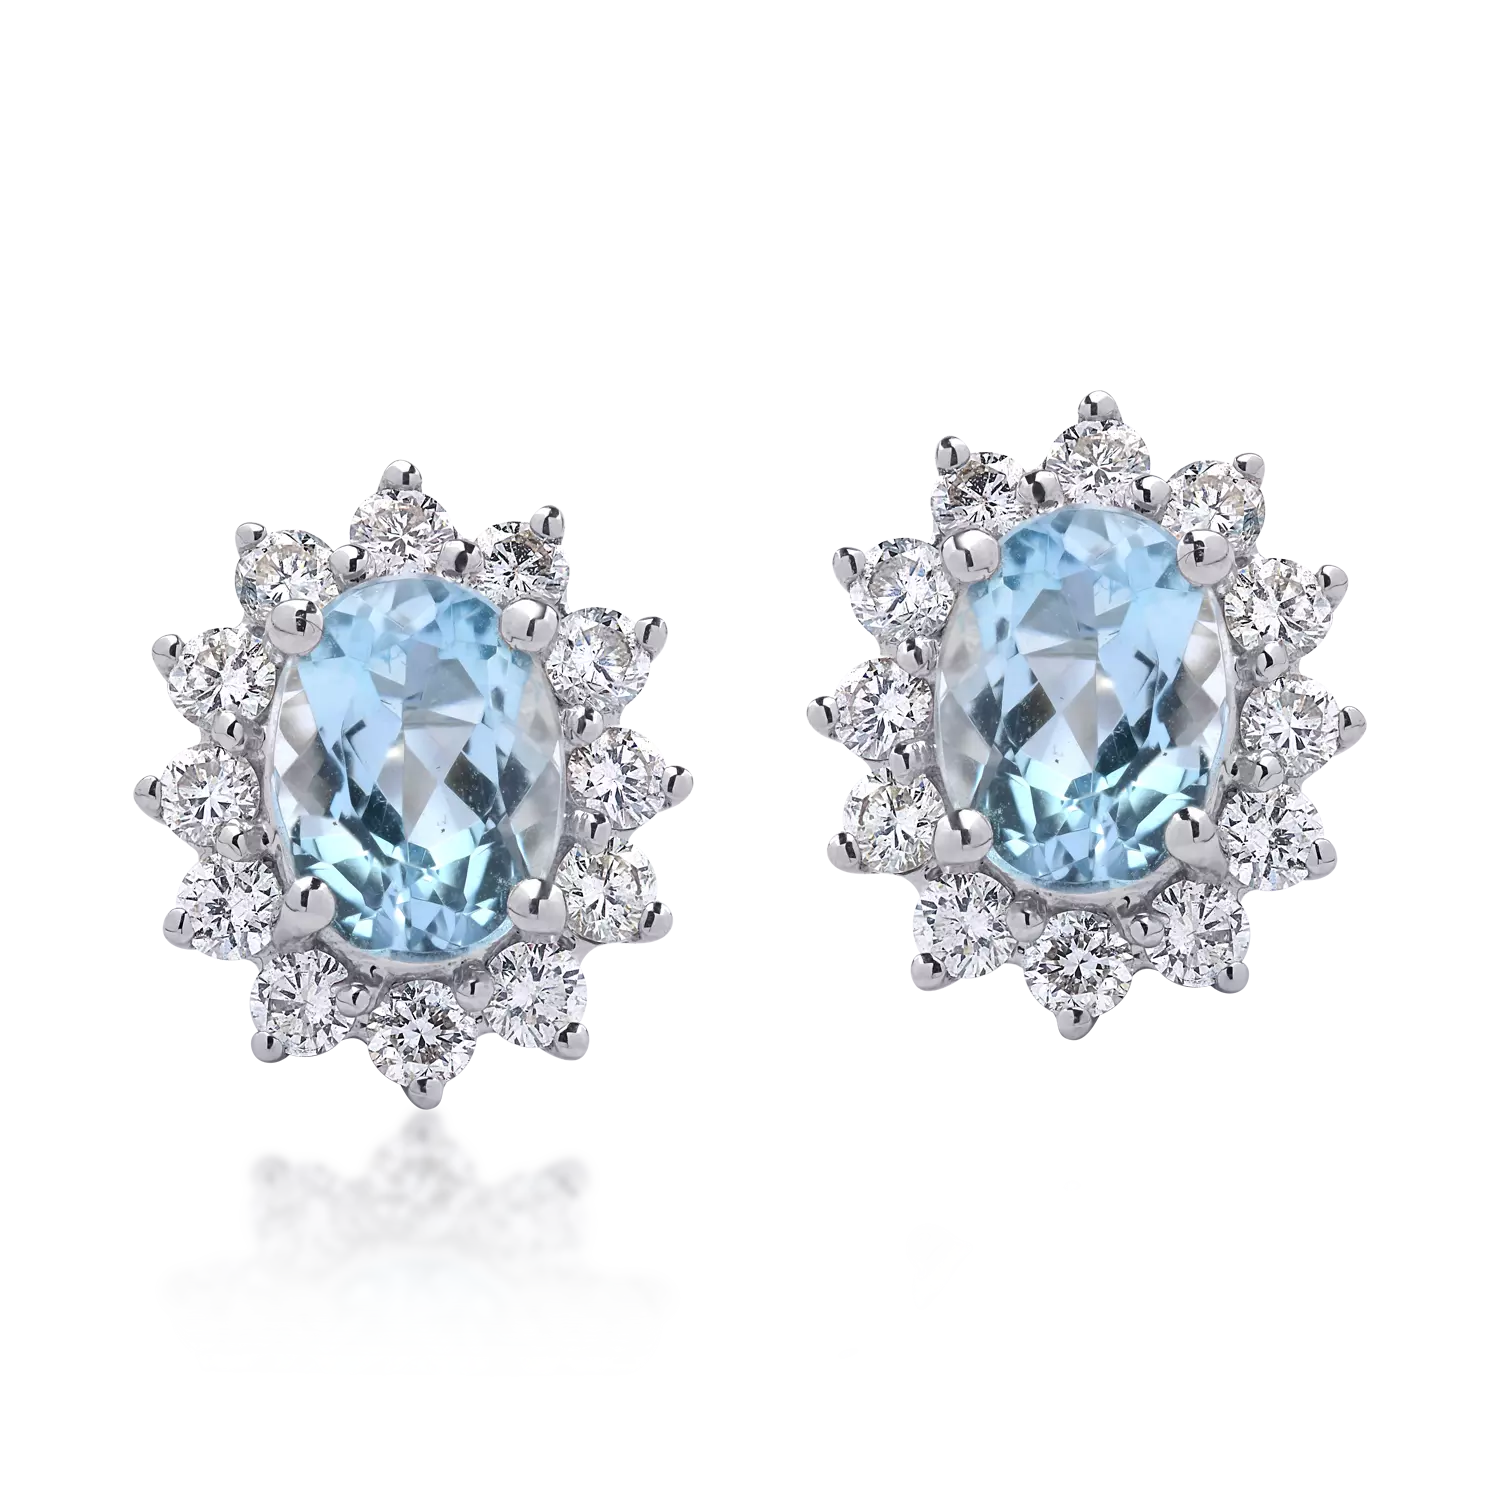 18K white gold earrings with 2.09ct aquamarines and 0.84ct diamonds